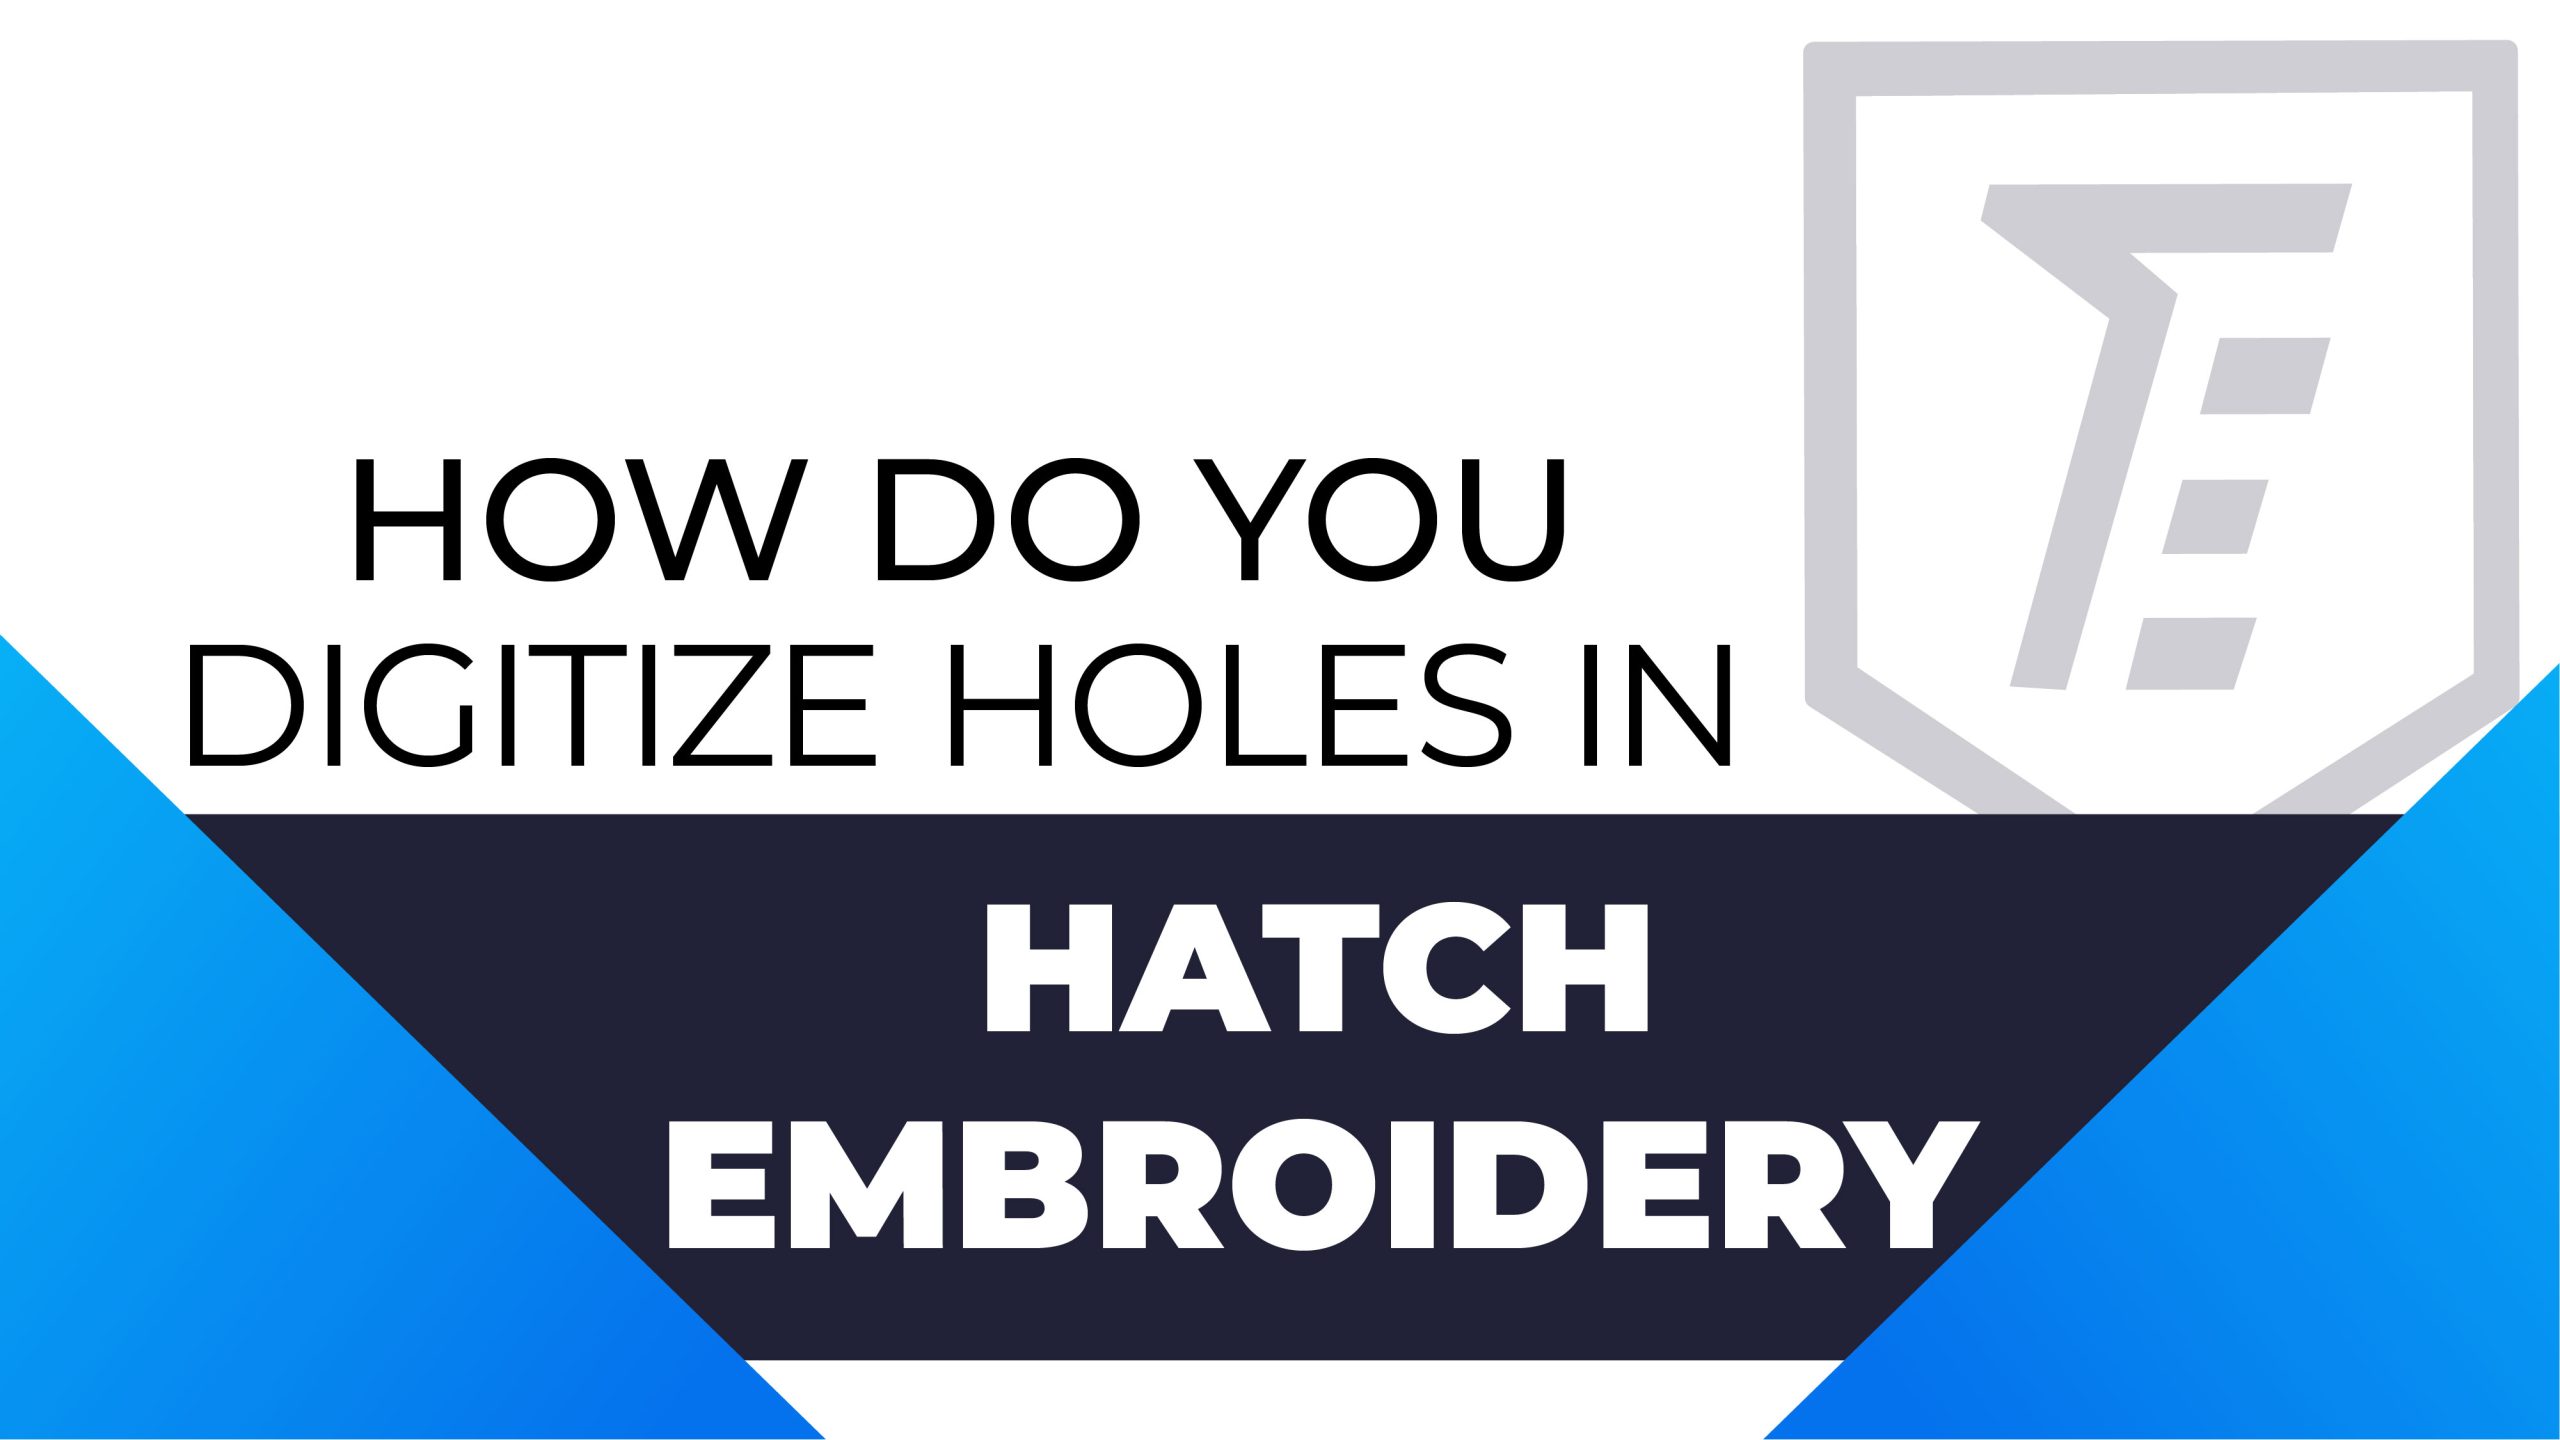 How Do You Digitize Holes in Hatch Embroidery